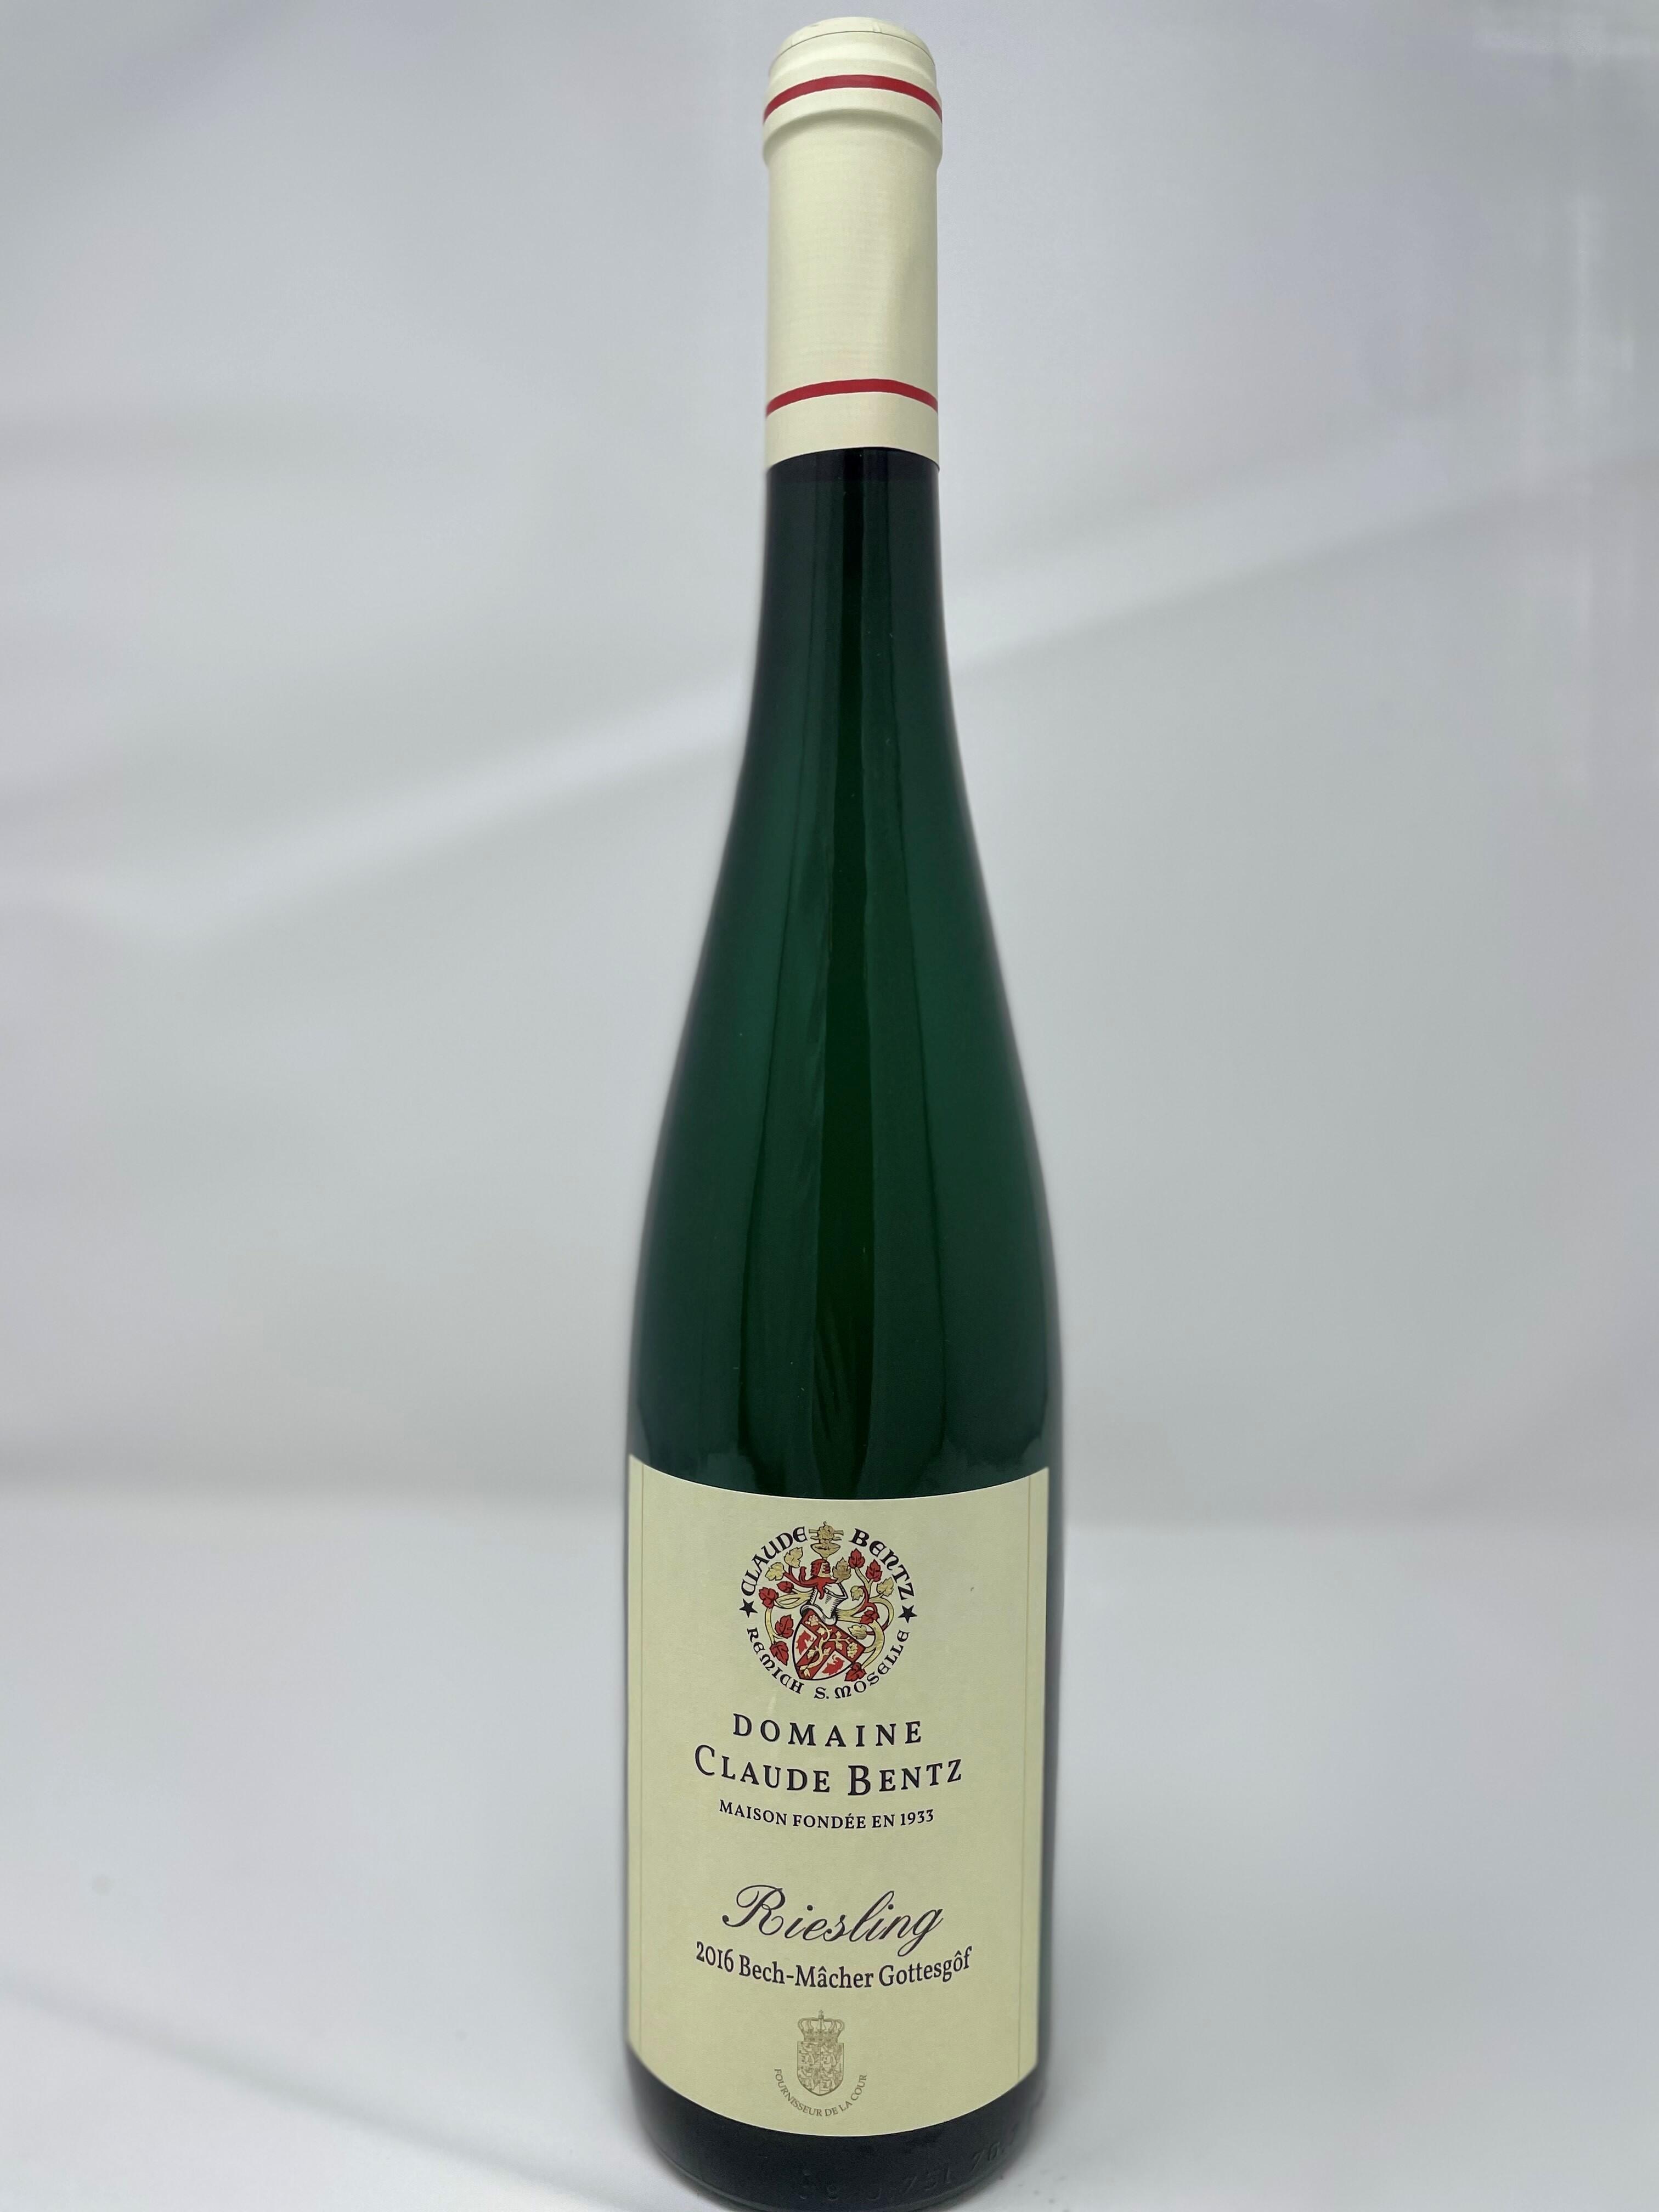 2016 Riesling Gottesgôf, aged for 6 years in steel tanks, limited edition